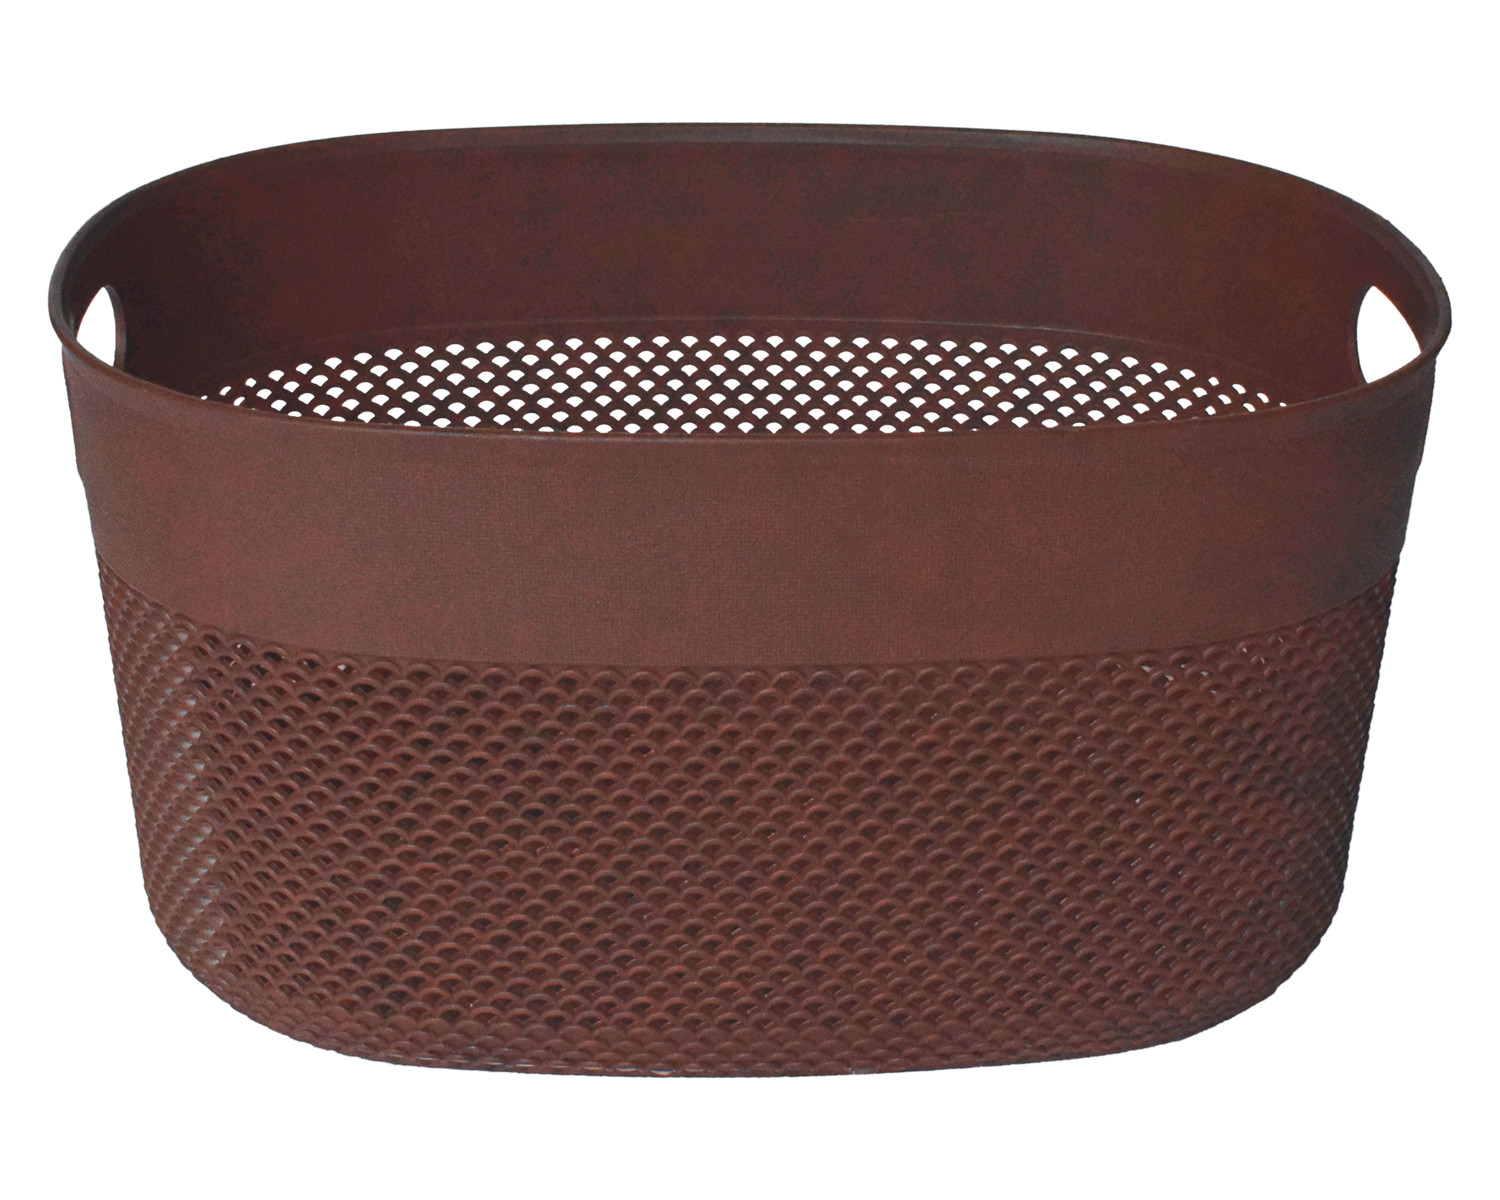 Kuber Industries Unbreakable Multipurpose Storage Baskets with lid|Design-Netted|Material-Plastic|Shape-Oval|Color-Brown|Small,Medium and Large|Pack of 3